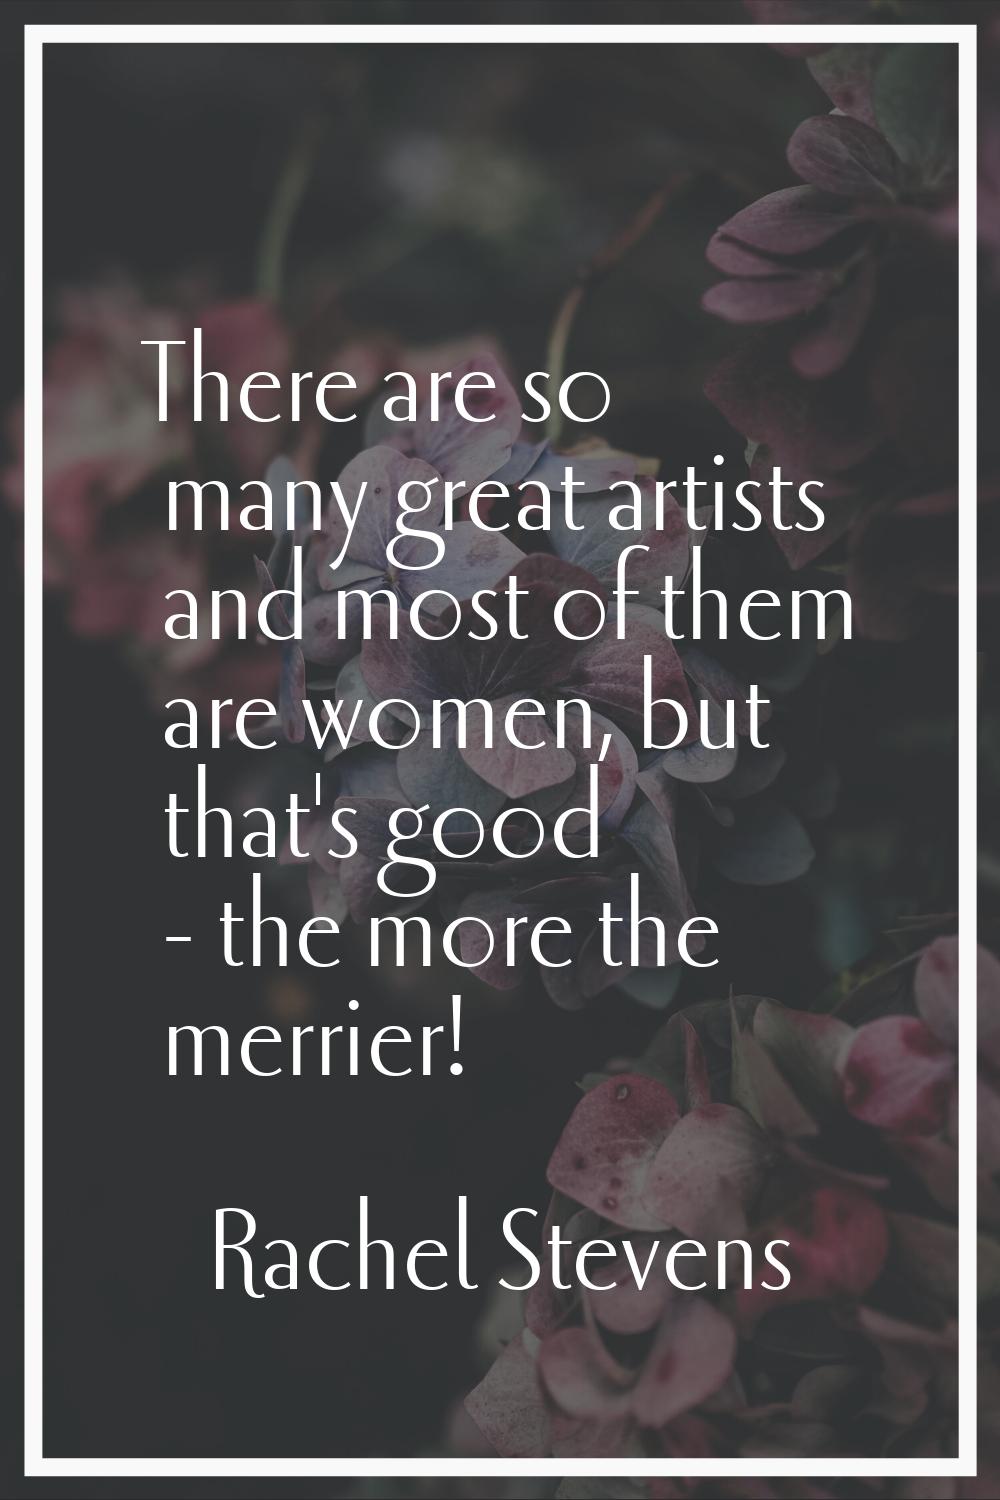 There are so many great artists and most of them are women, but that's good - the more the merrier!